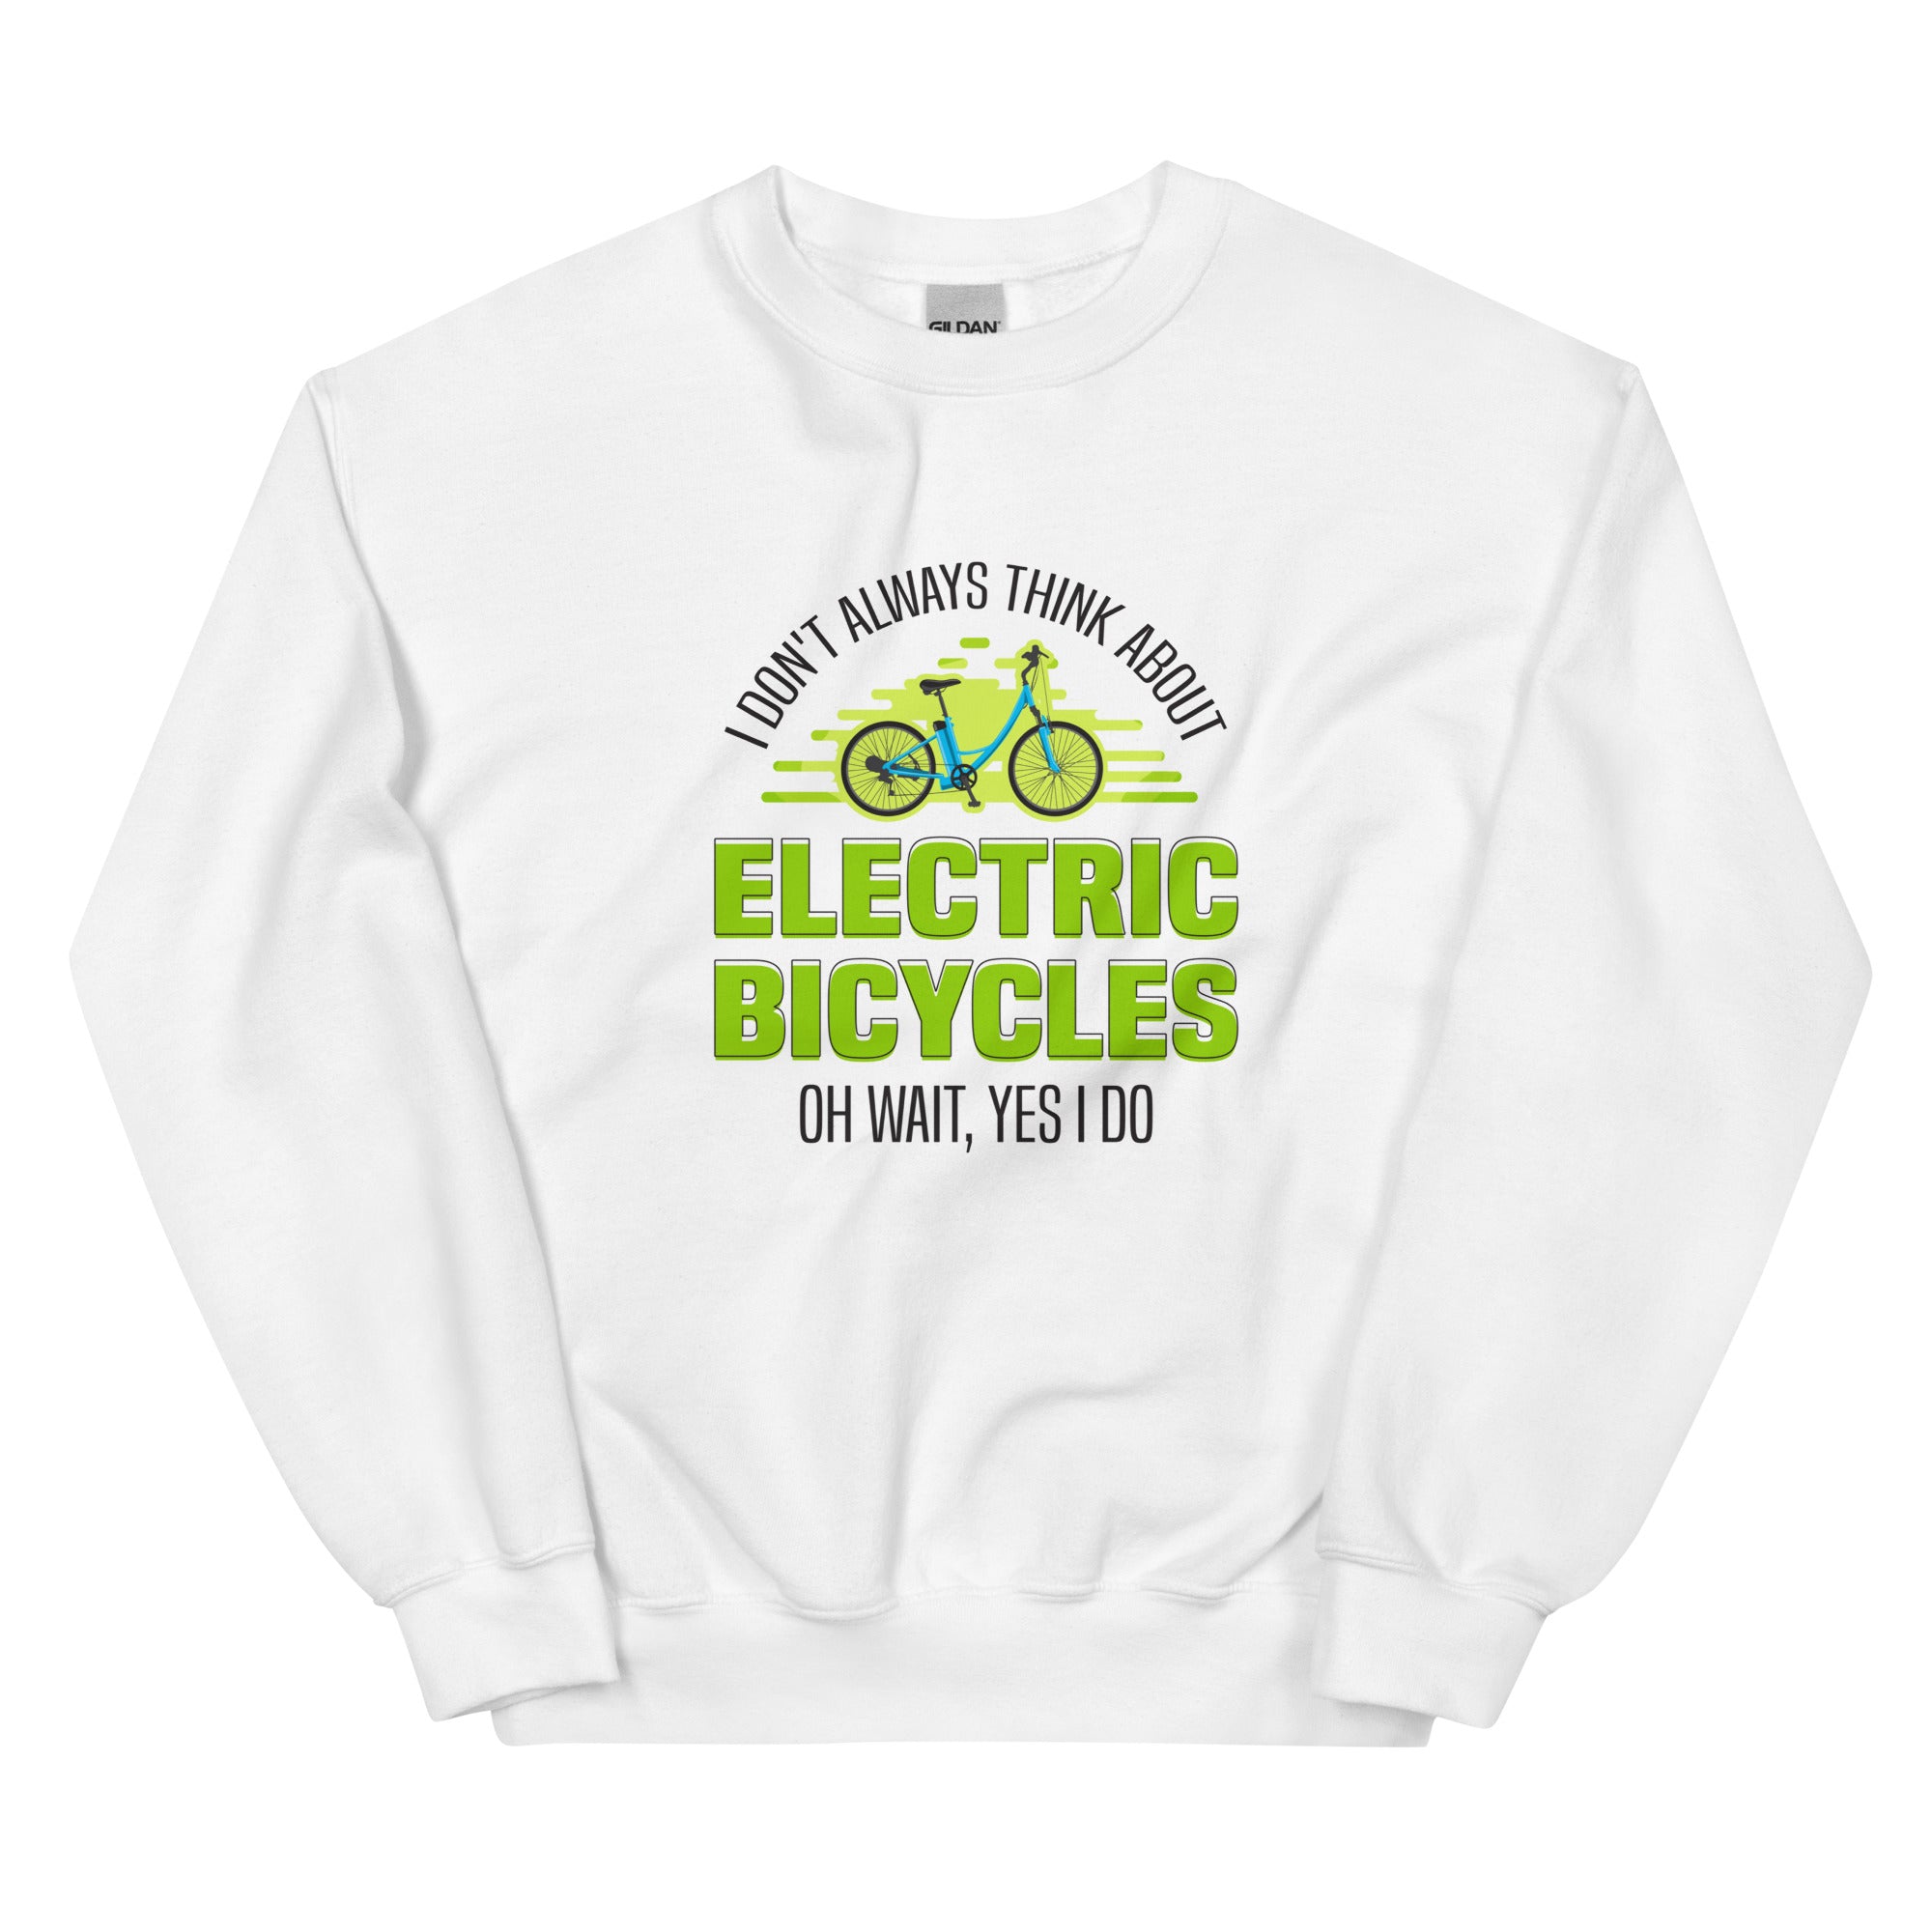 I Don't Always Think About Electric Bicycles Oh Wait, Yes I Do Gildan 18000 Men’s Sweatshirt White